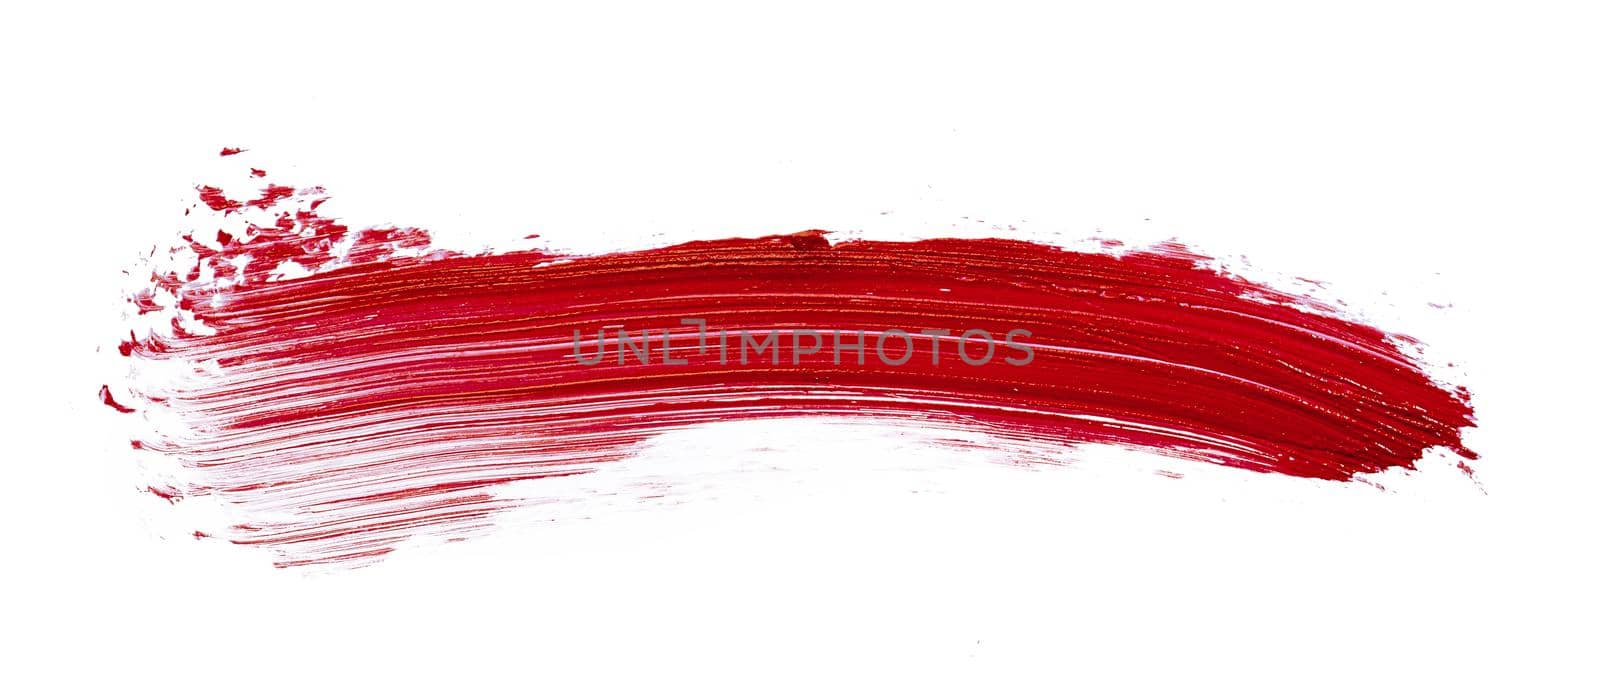 Red lipstick smudge stains isolated on white by Fabrikasimf